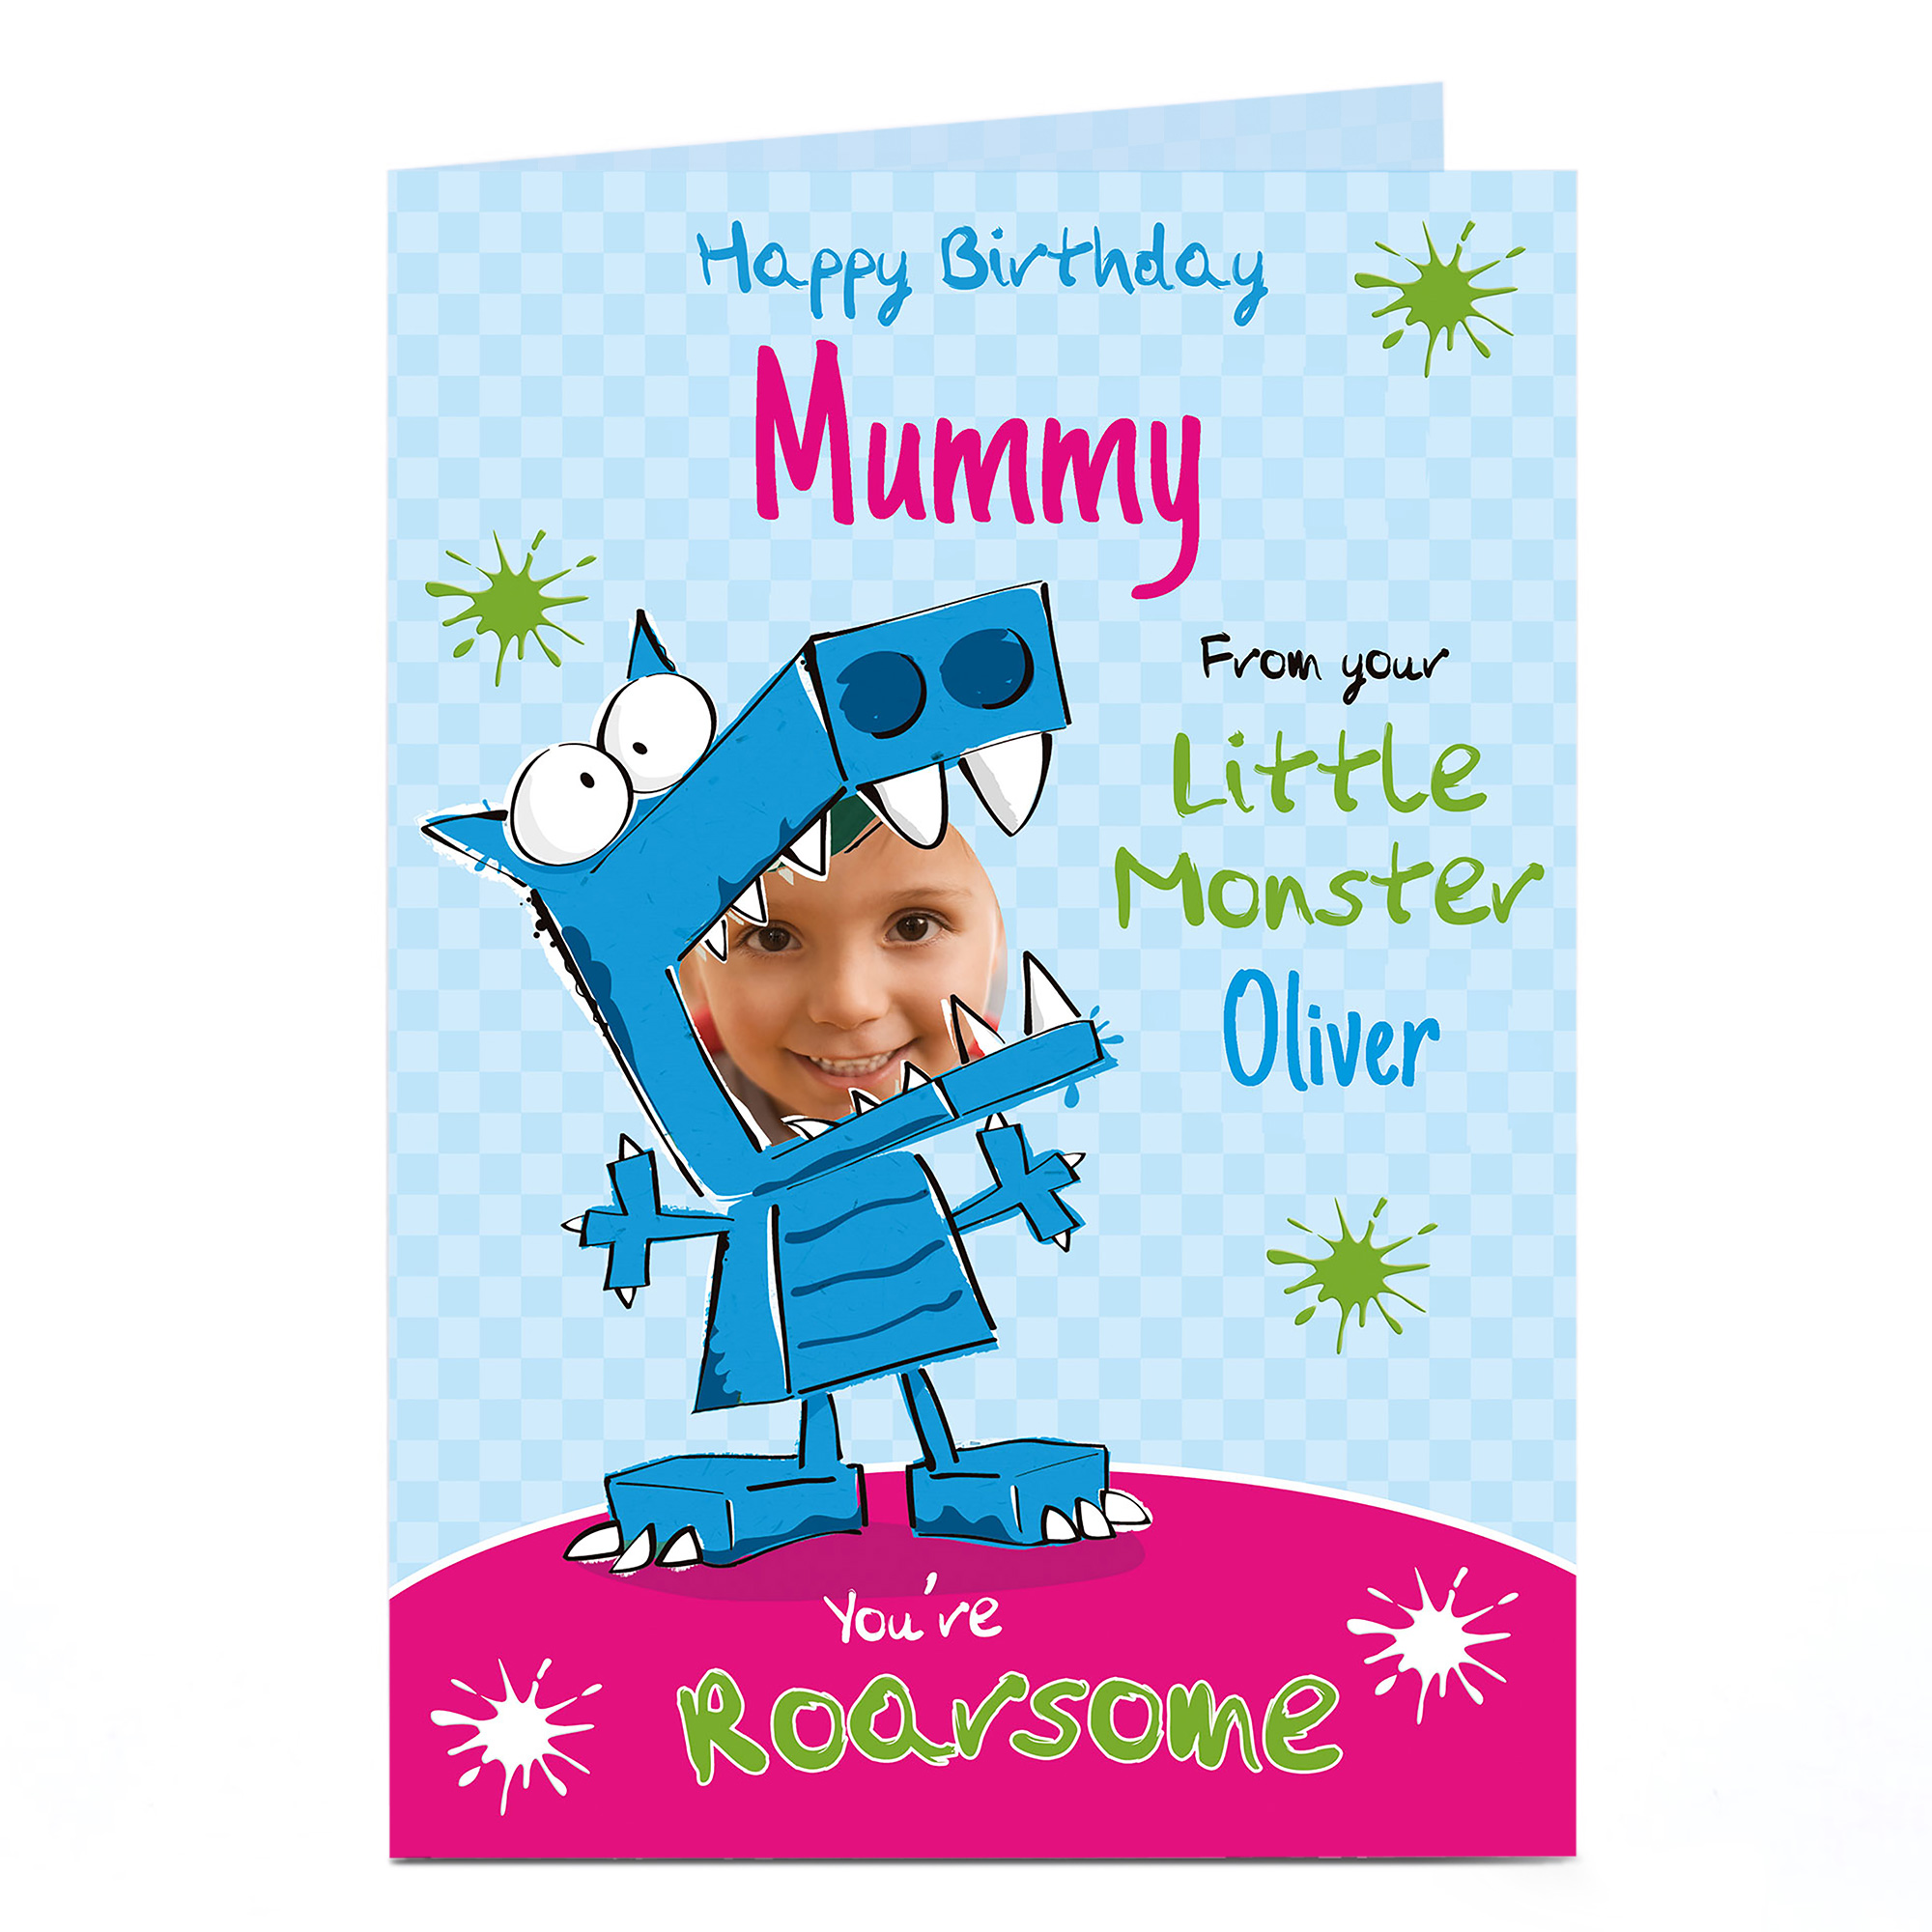 Photo Birthday Card - From your Little Monster